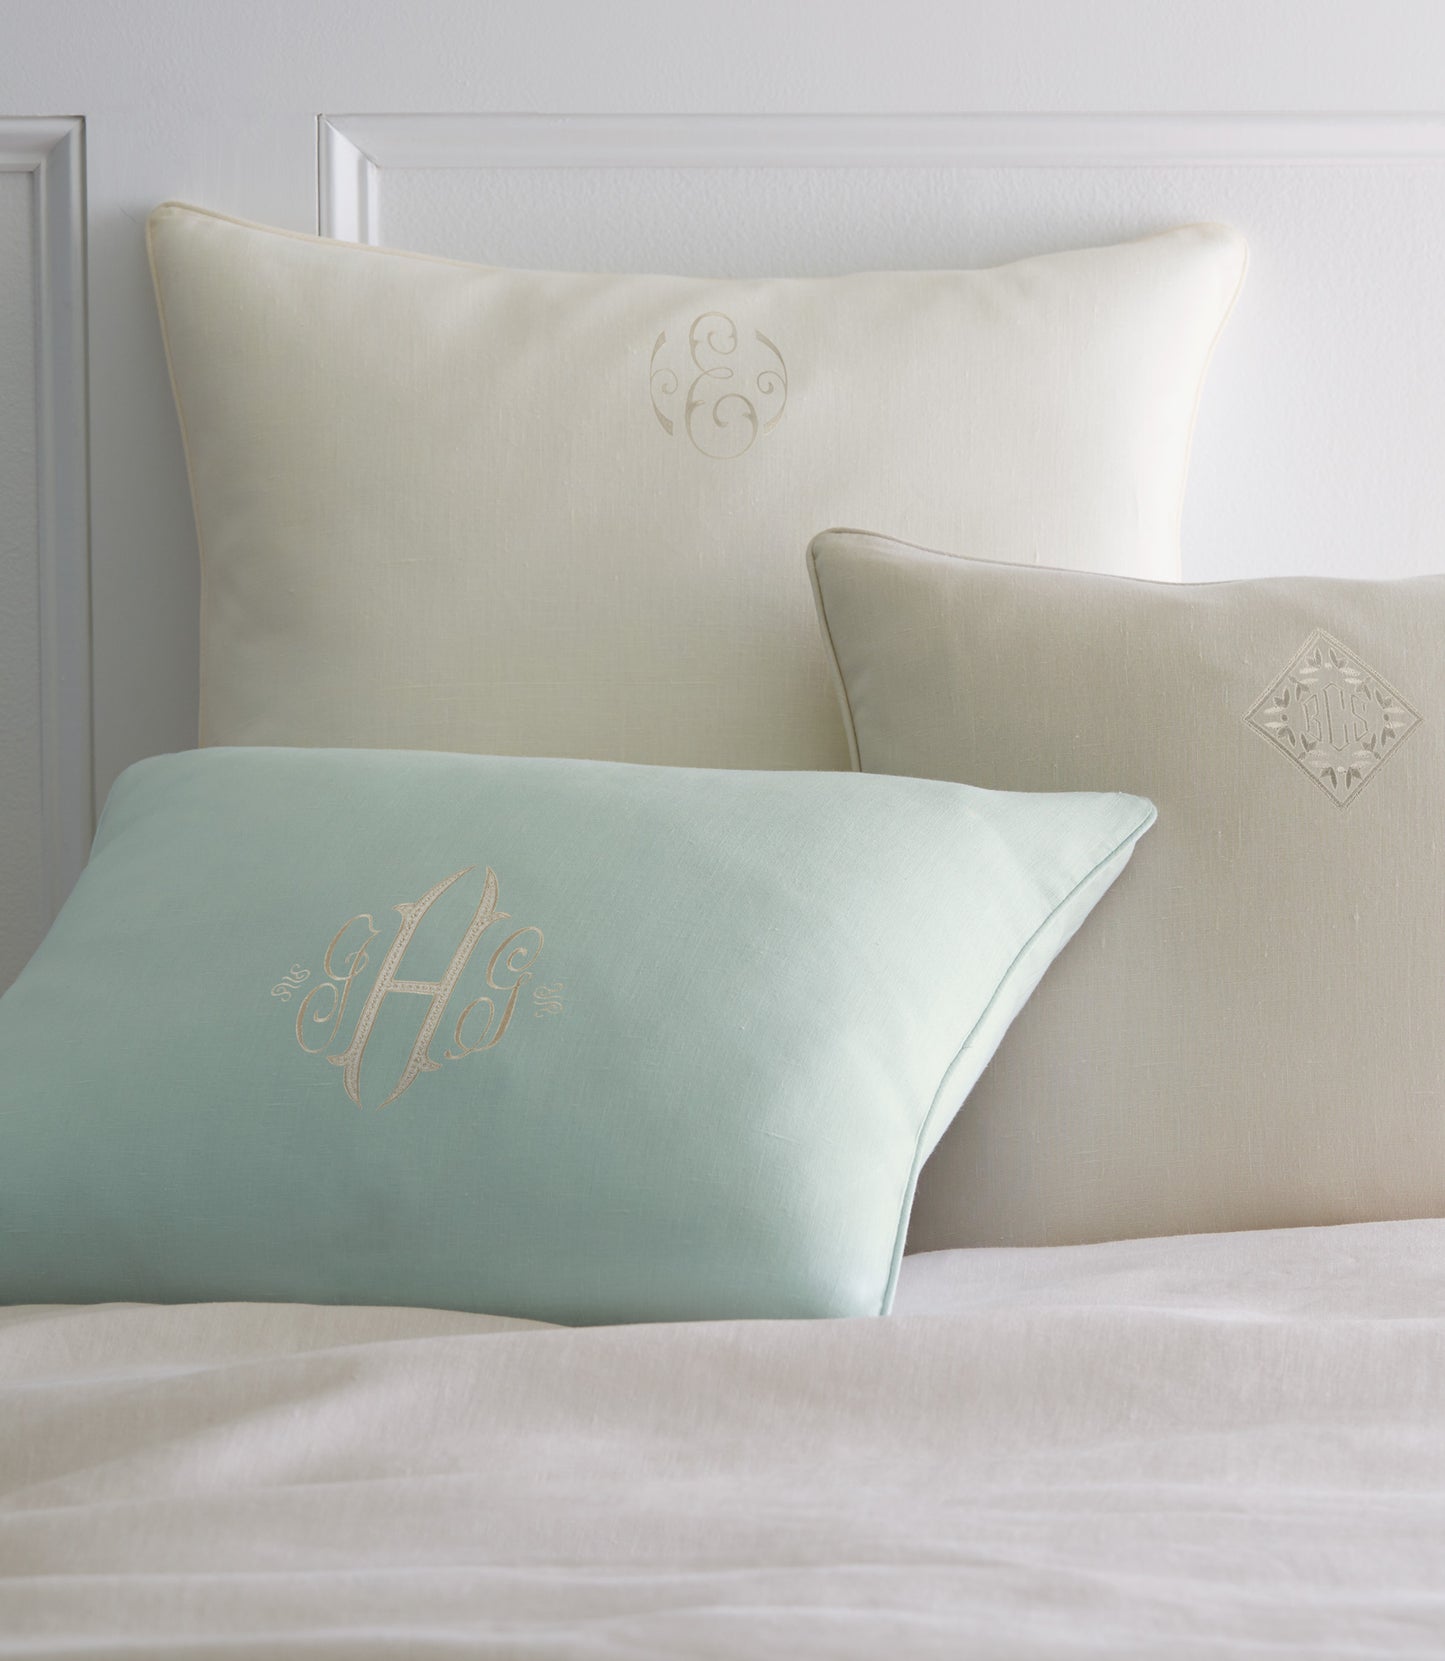 Mandalay Decorative Pillows On Bed Lagoon Linen Pearl Colors